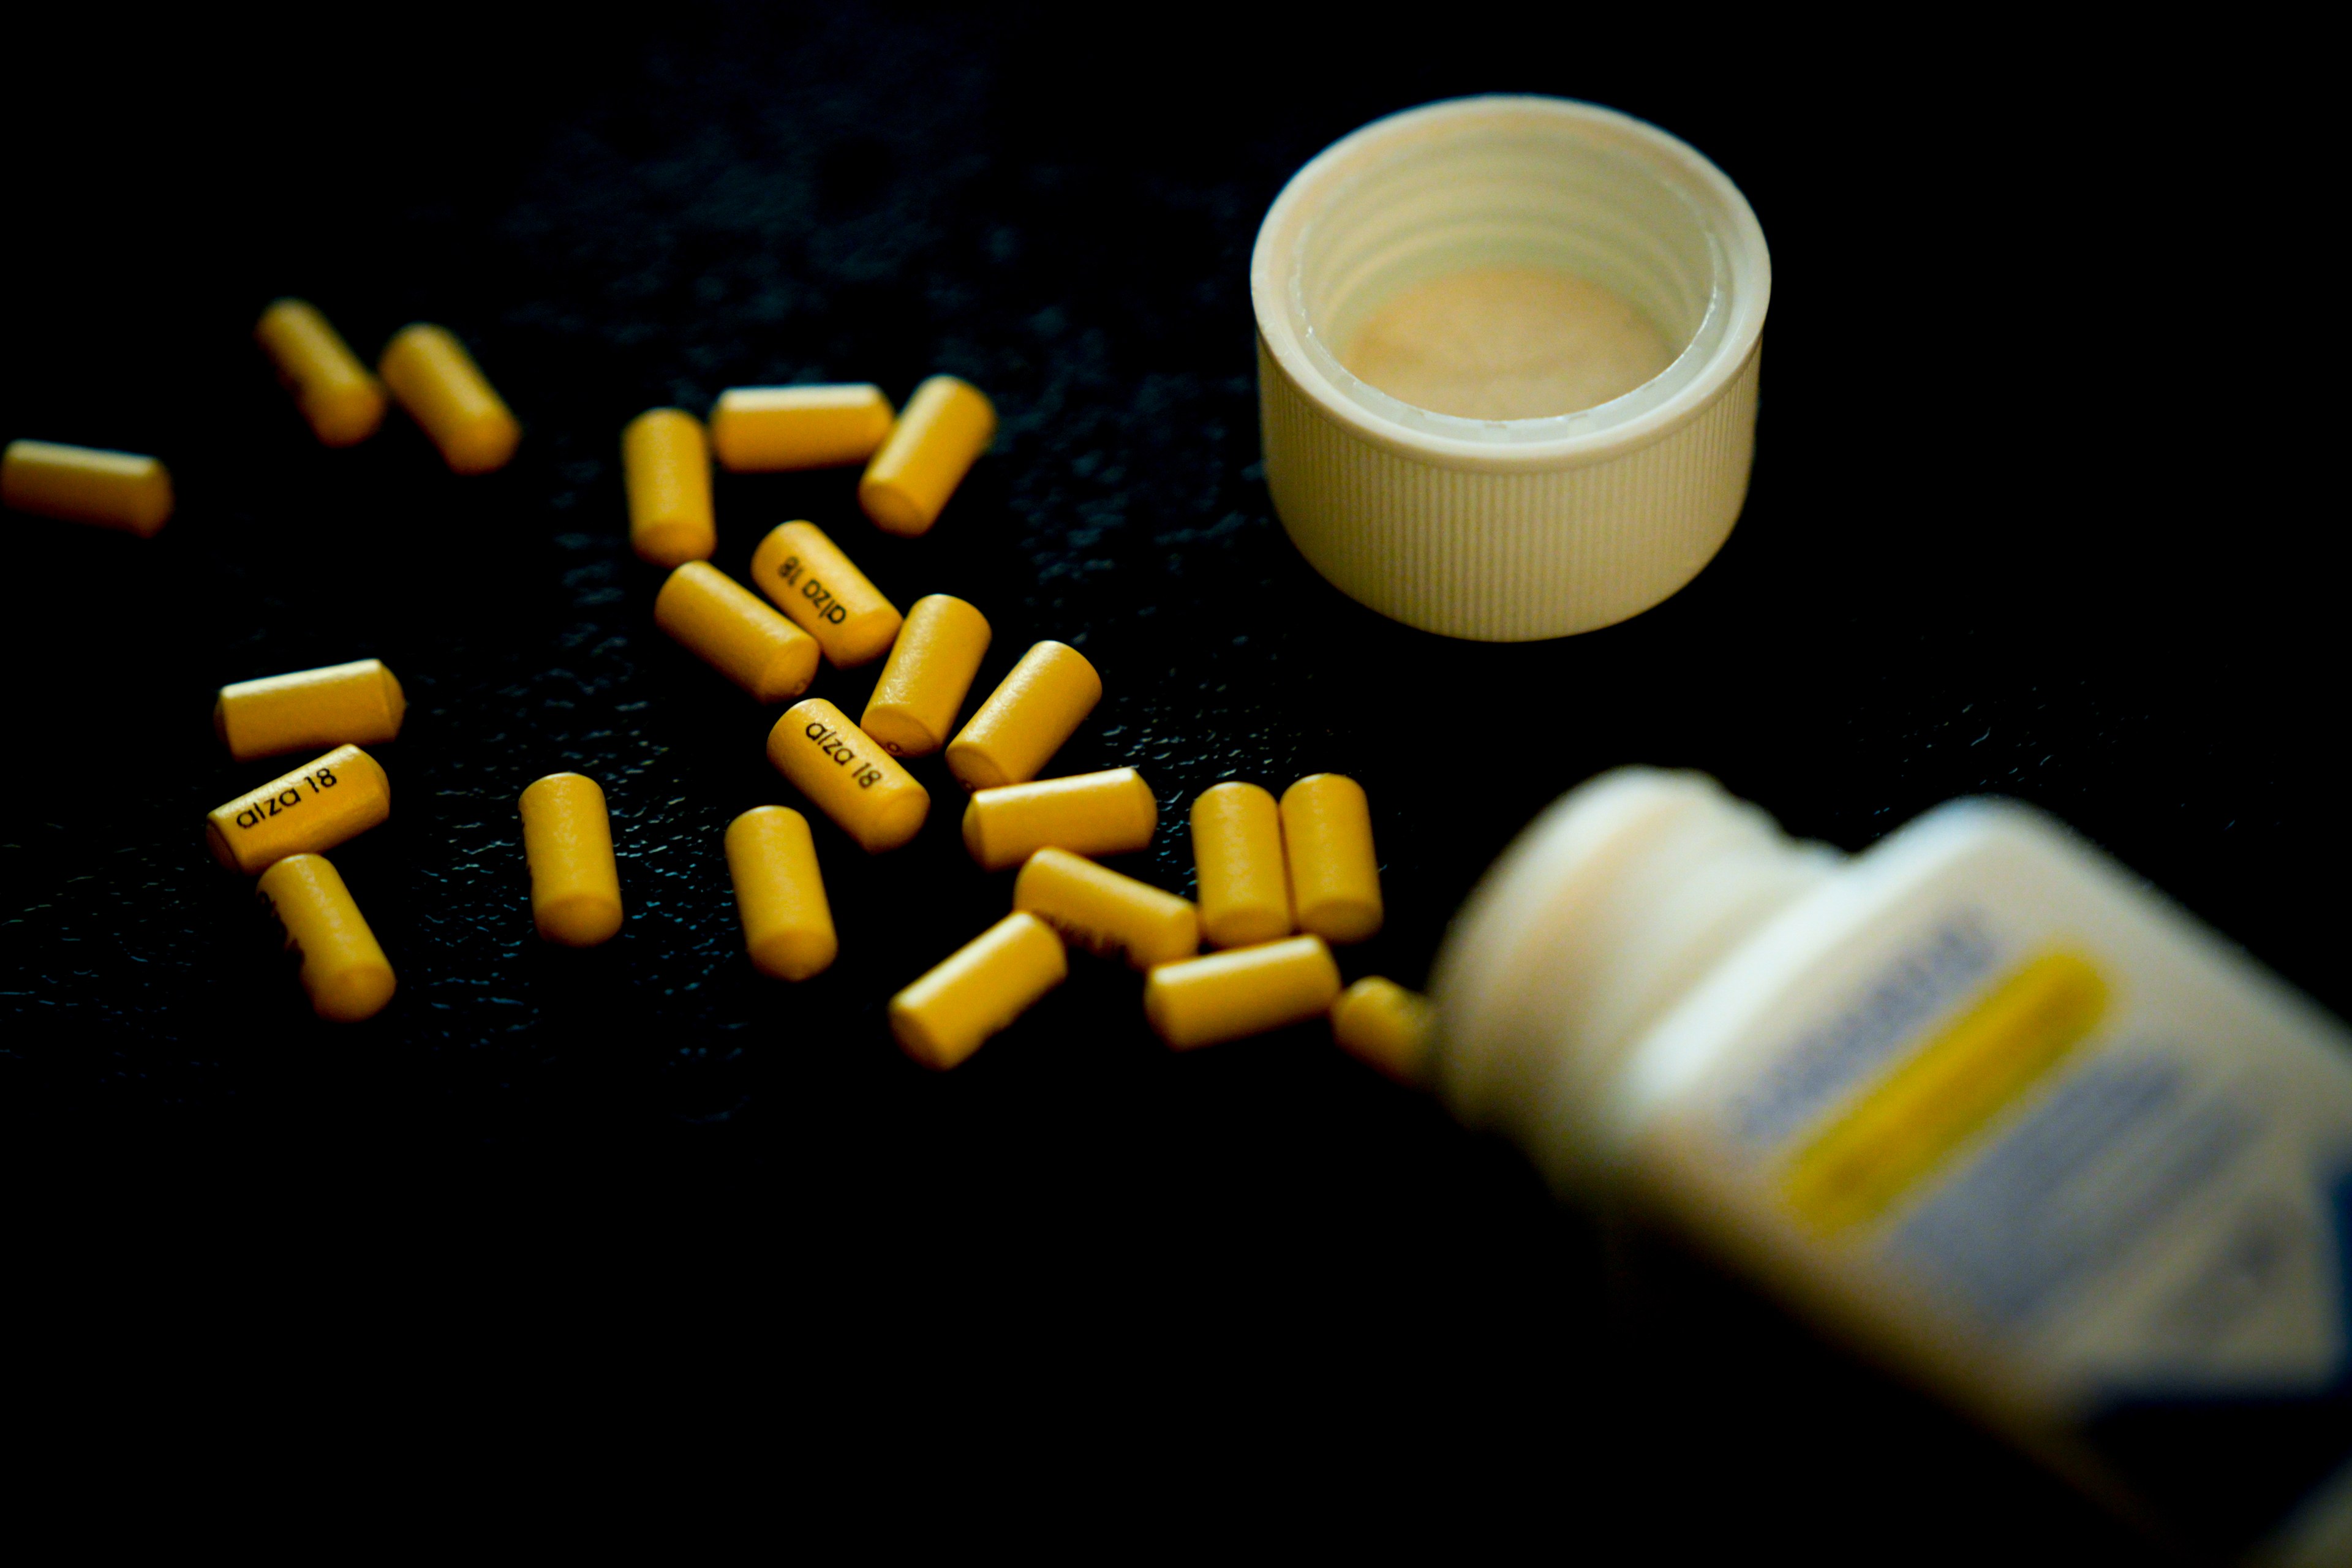 Yellow capsules have spilled onto a dark surface from a white, open pill bottle, which has its cap next to it. Some capsules are scattered around.